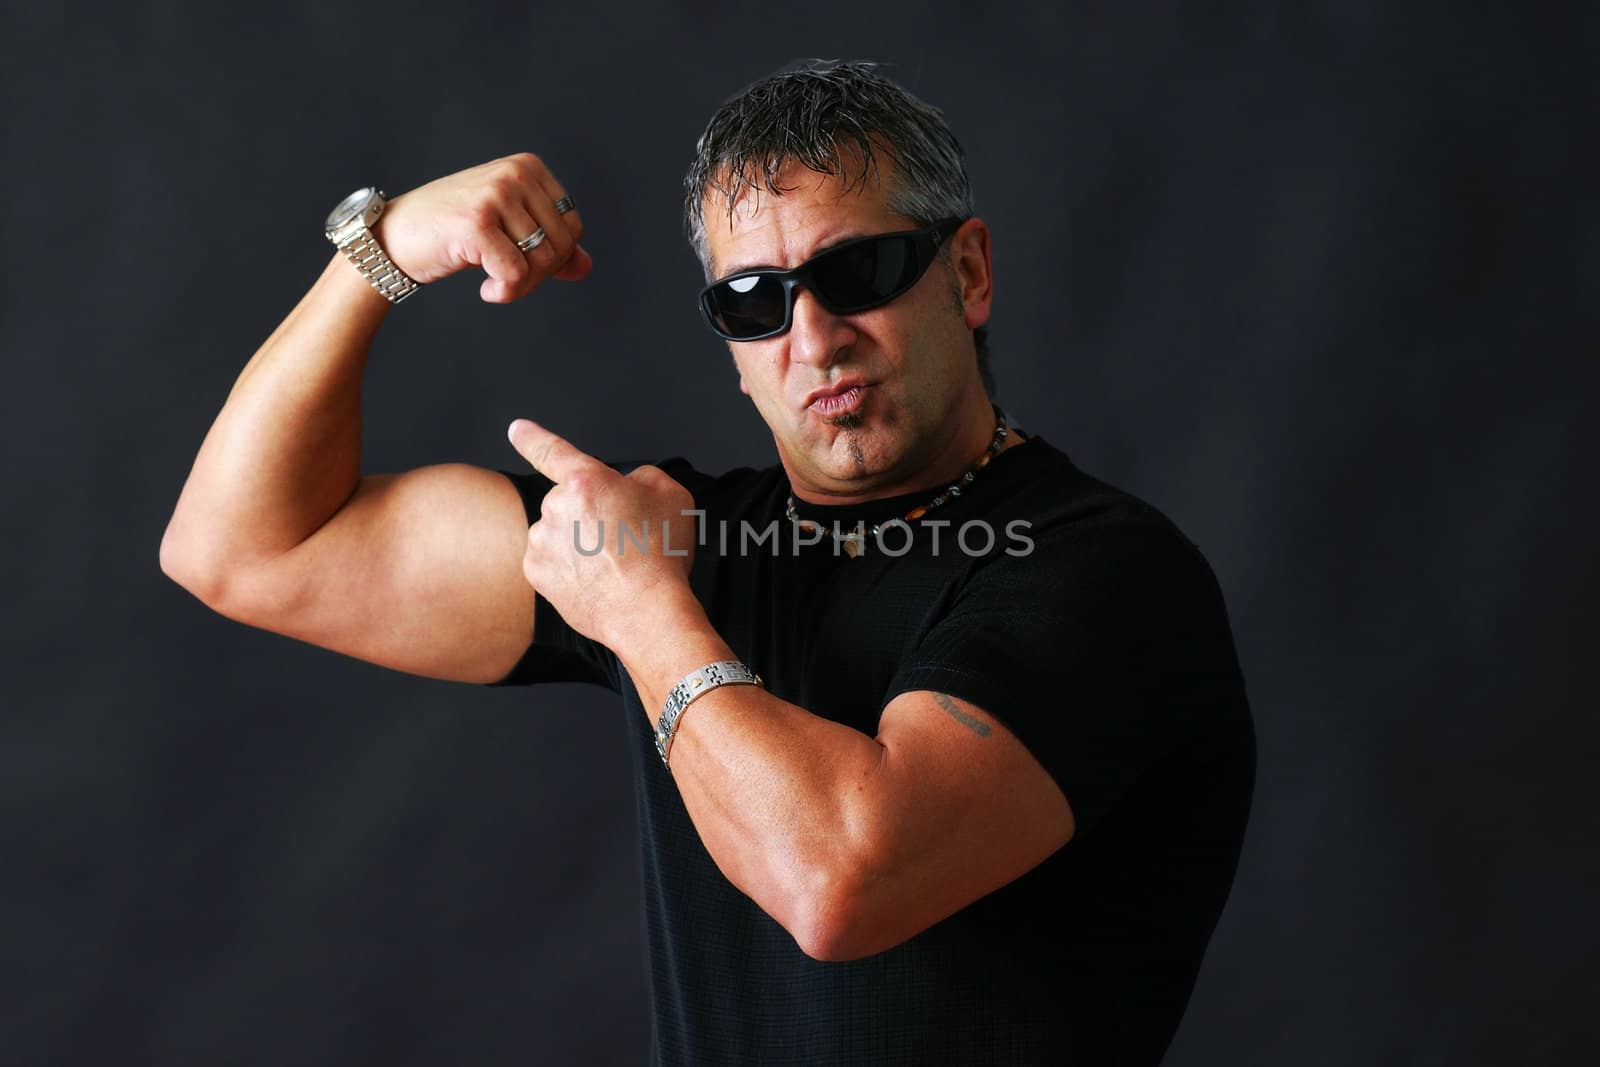 Tough guy with dark glasses, could be criminal, showing his big bicep muscle has an intimidation tactik, studio shot over black.